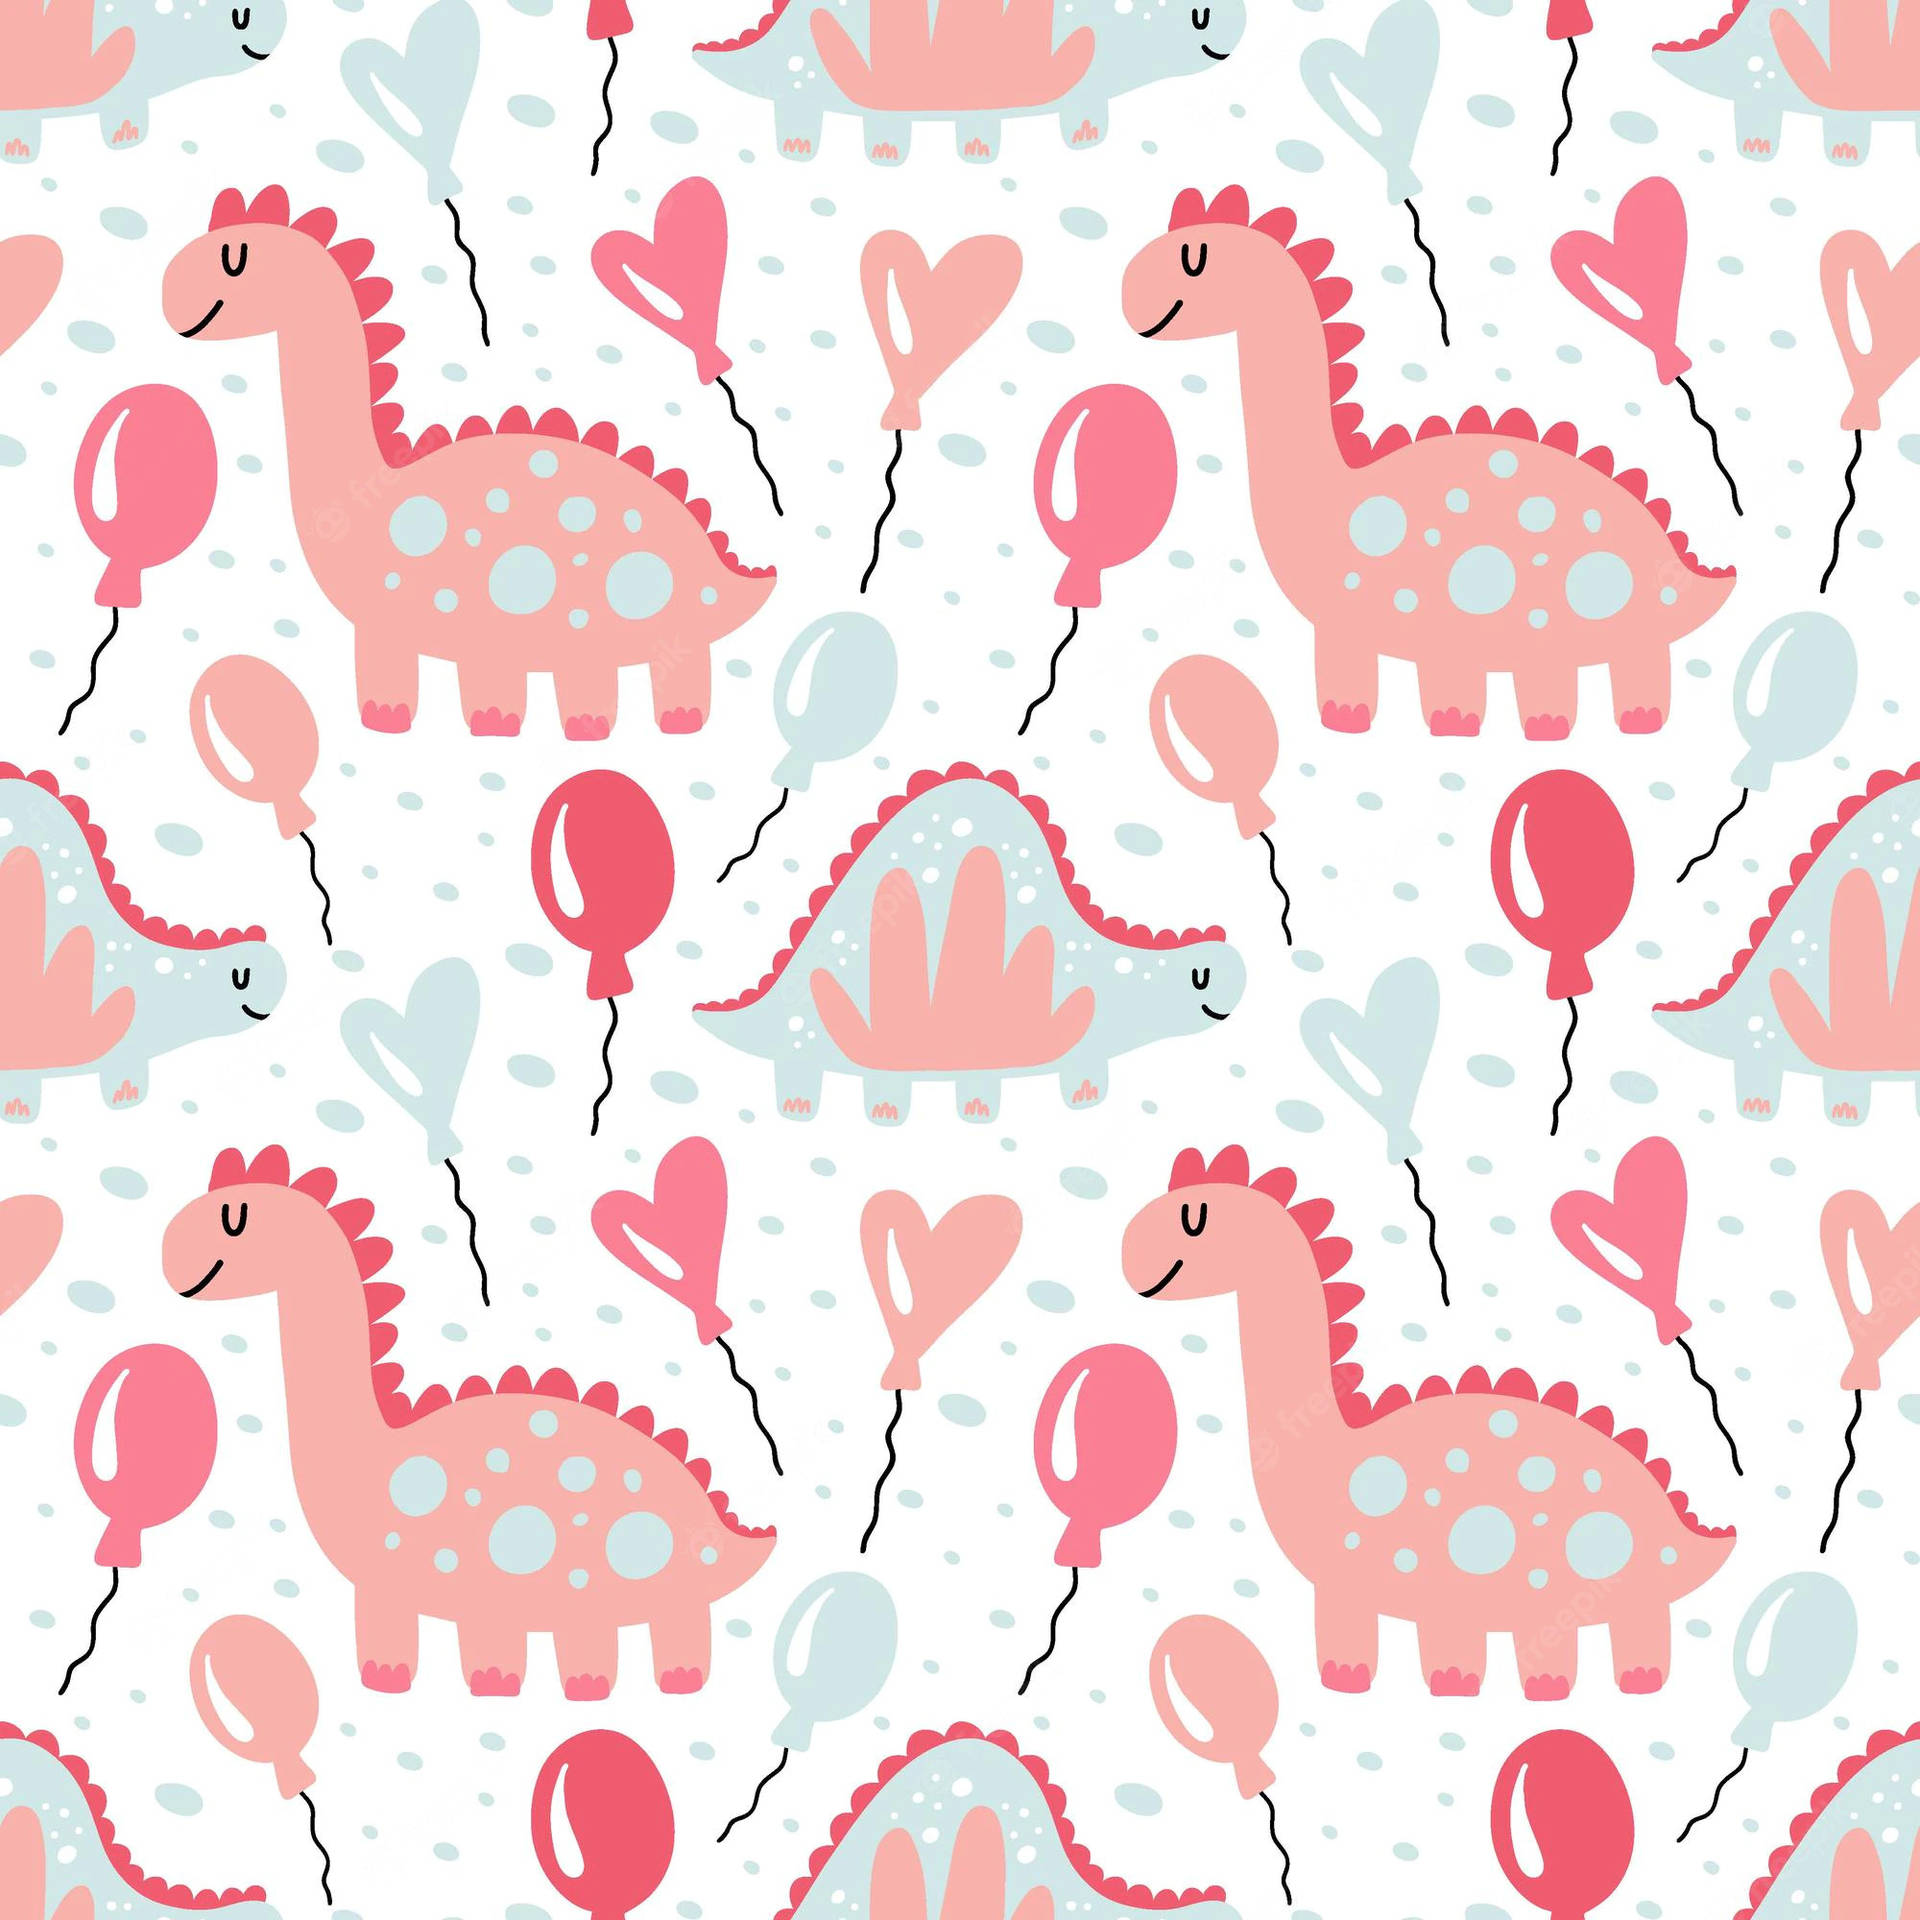 Cute Pink Dinosaur Pattern With Balloons